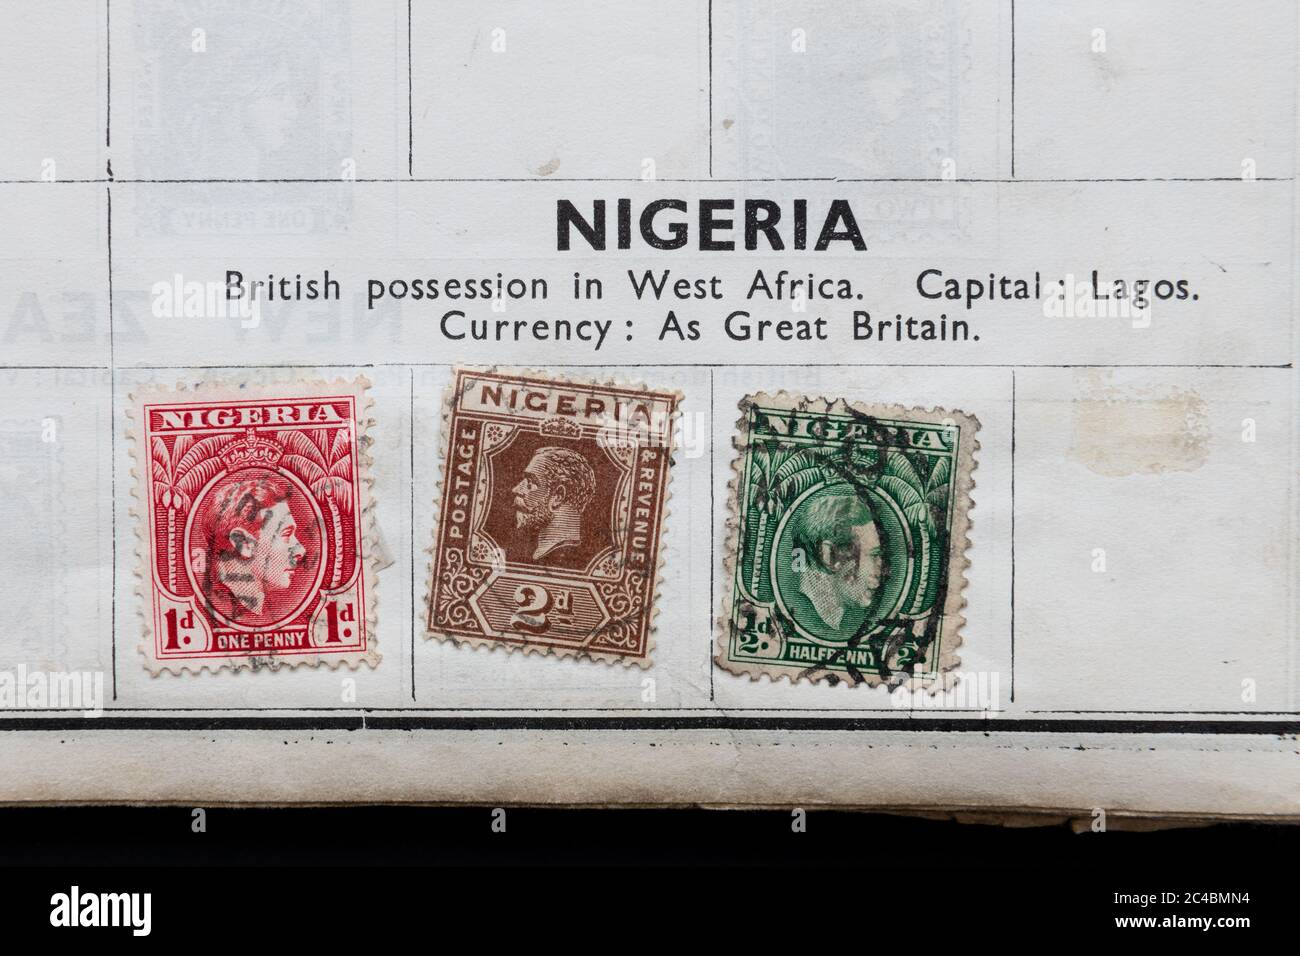 Colonial Nigeria - Nigerian postage stamps in stamp album Stock Photo